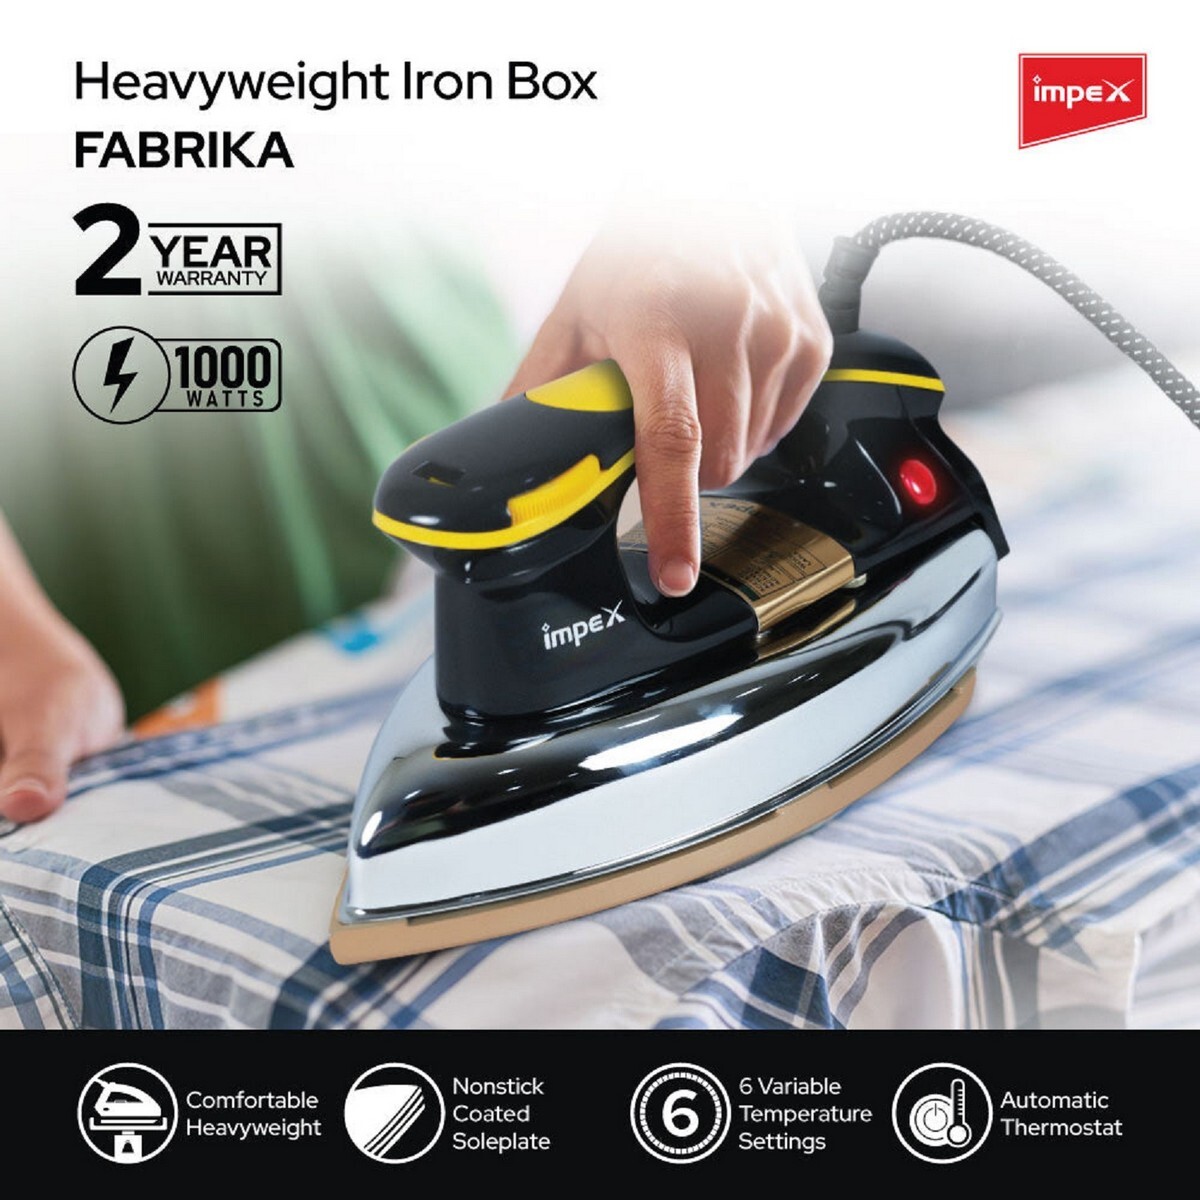 Impex Electric IronBox Heavy Weight Fabrika